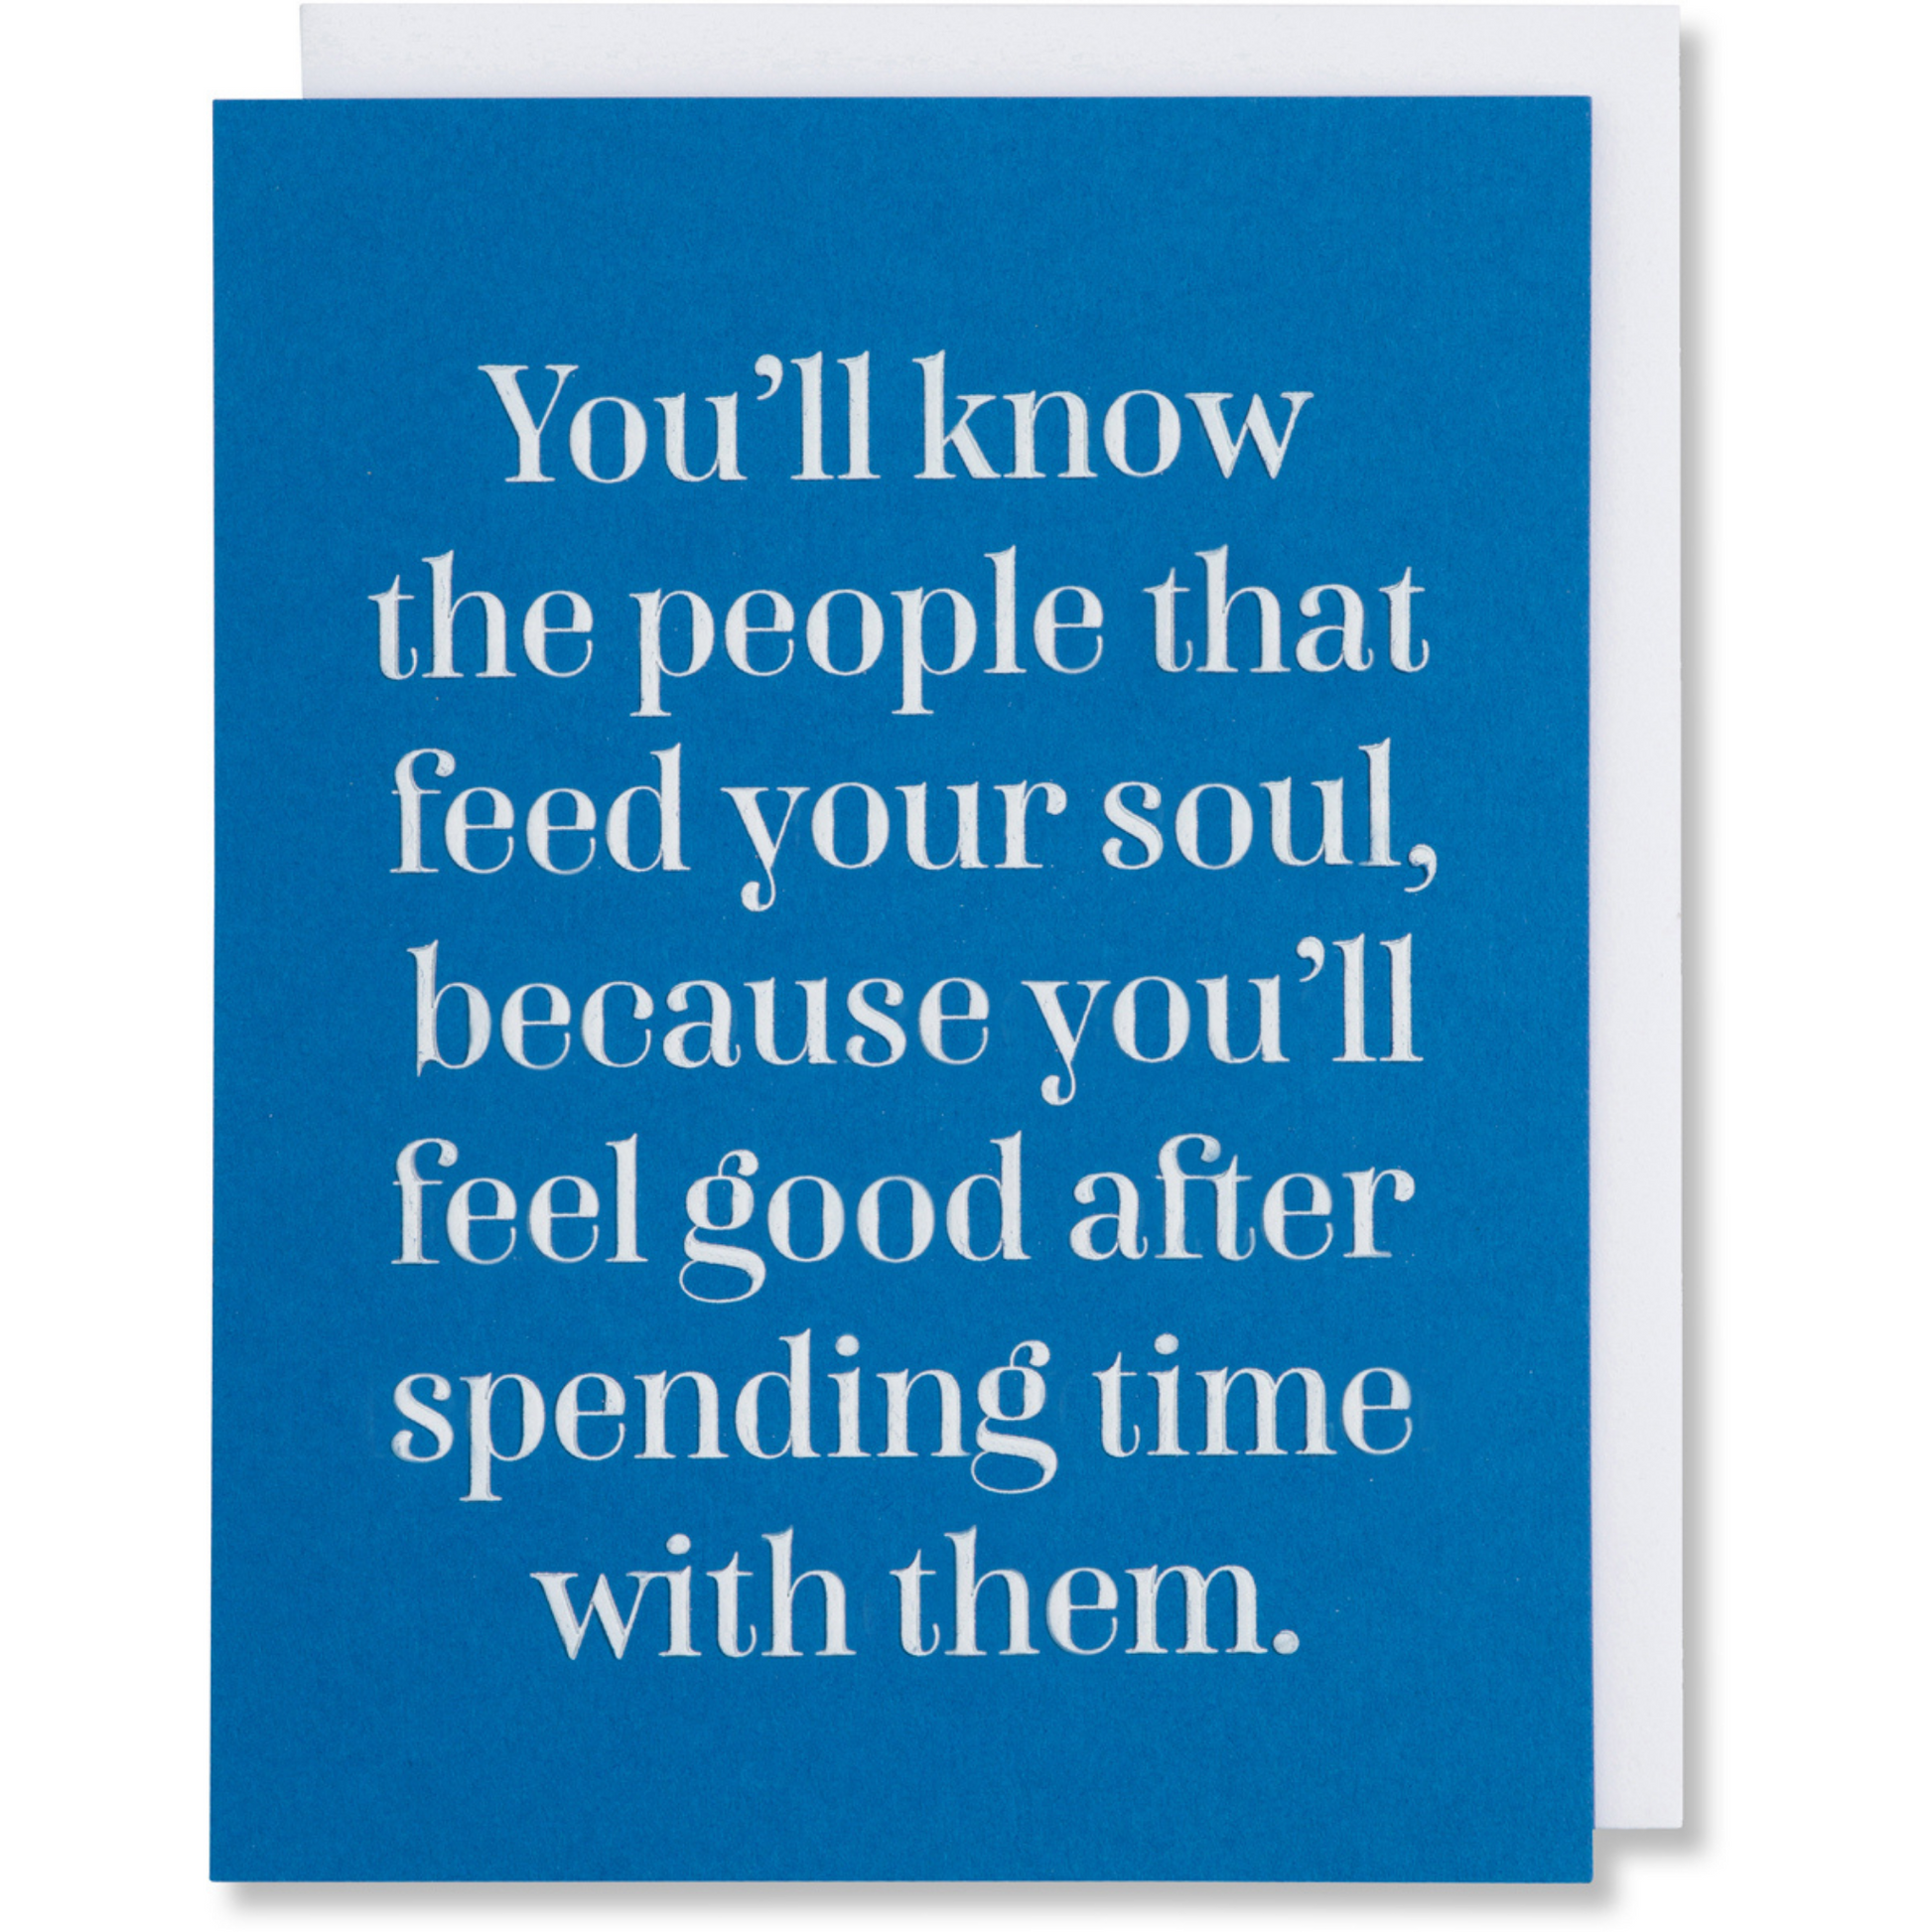 White foil embossed on Adriatic blue greeting card with the quote  "You'll know the people that feed your soul because you'll feel good after spending time with them."